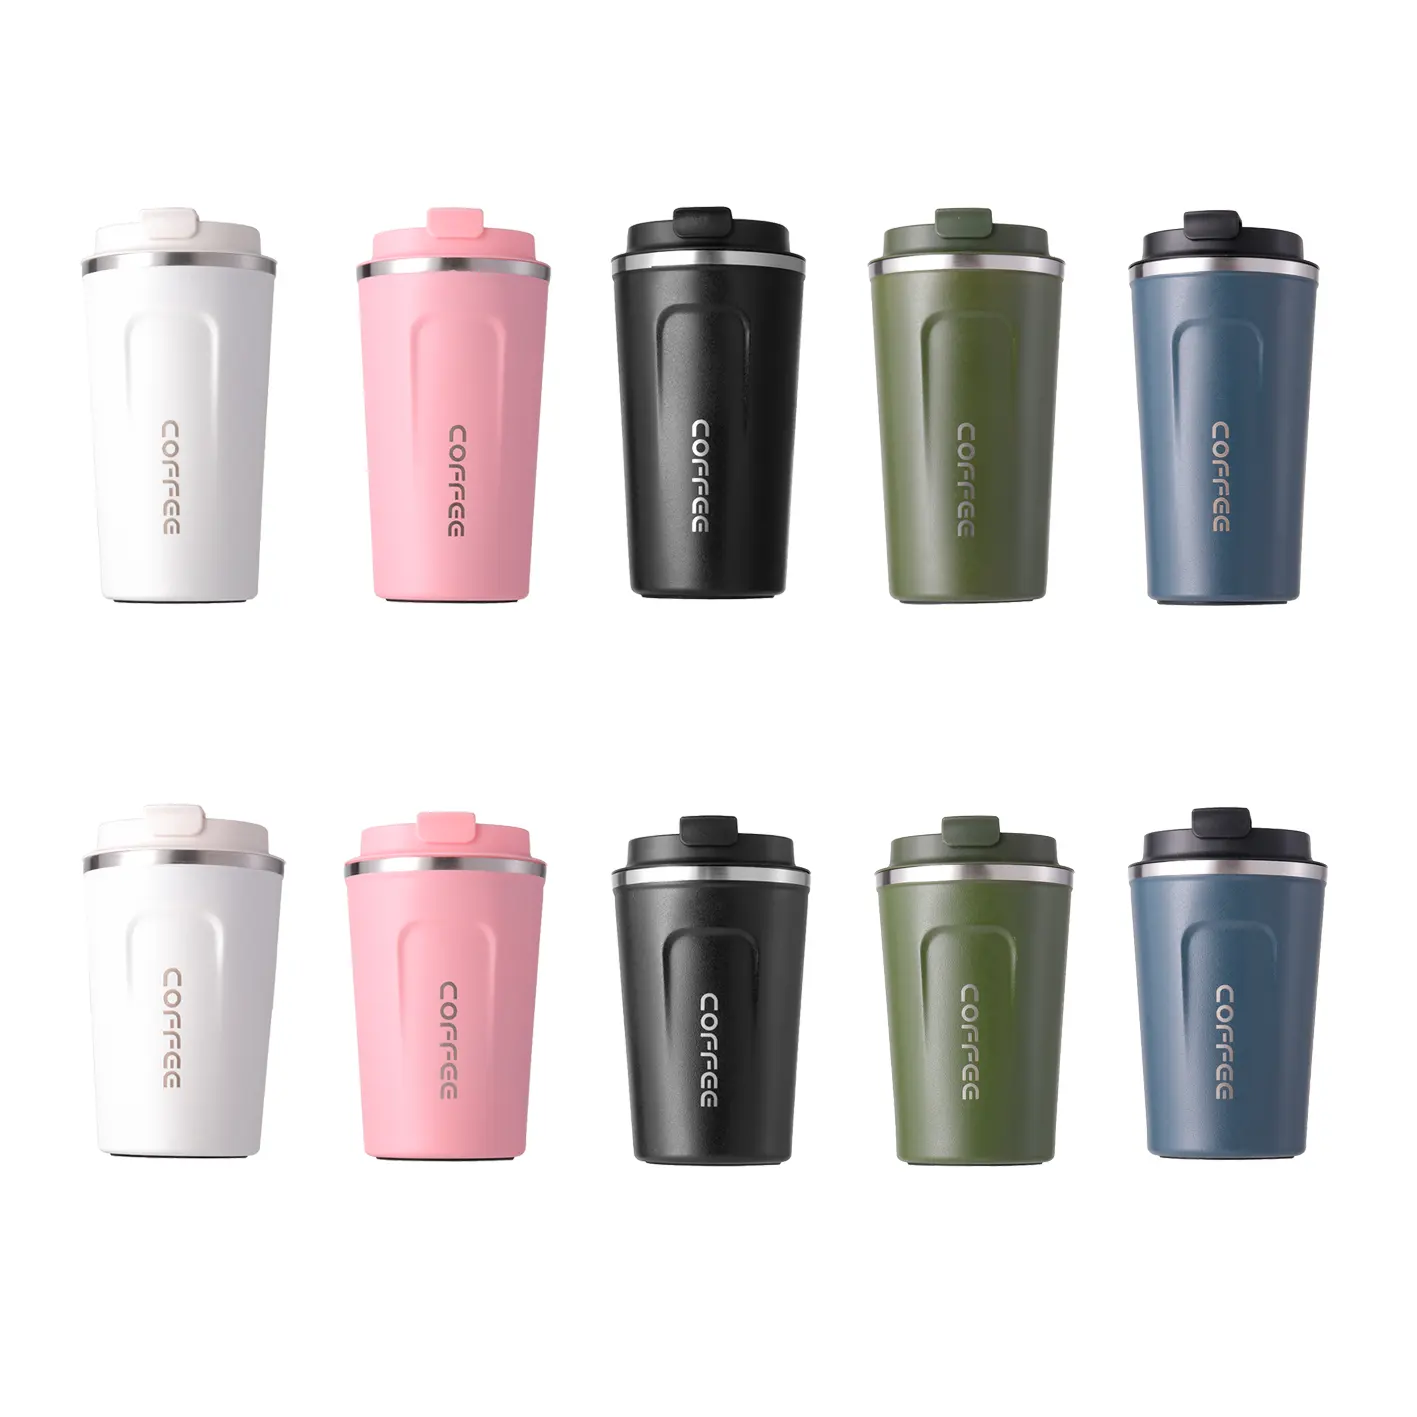 380ml 510ml Eco-friendly Double Walled Stainless Steel Travel Coffee Mug Vacuum Insulated Reusable Coffee Tumbler Cup